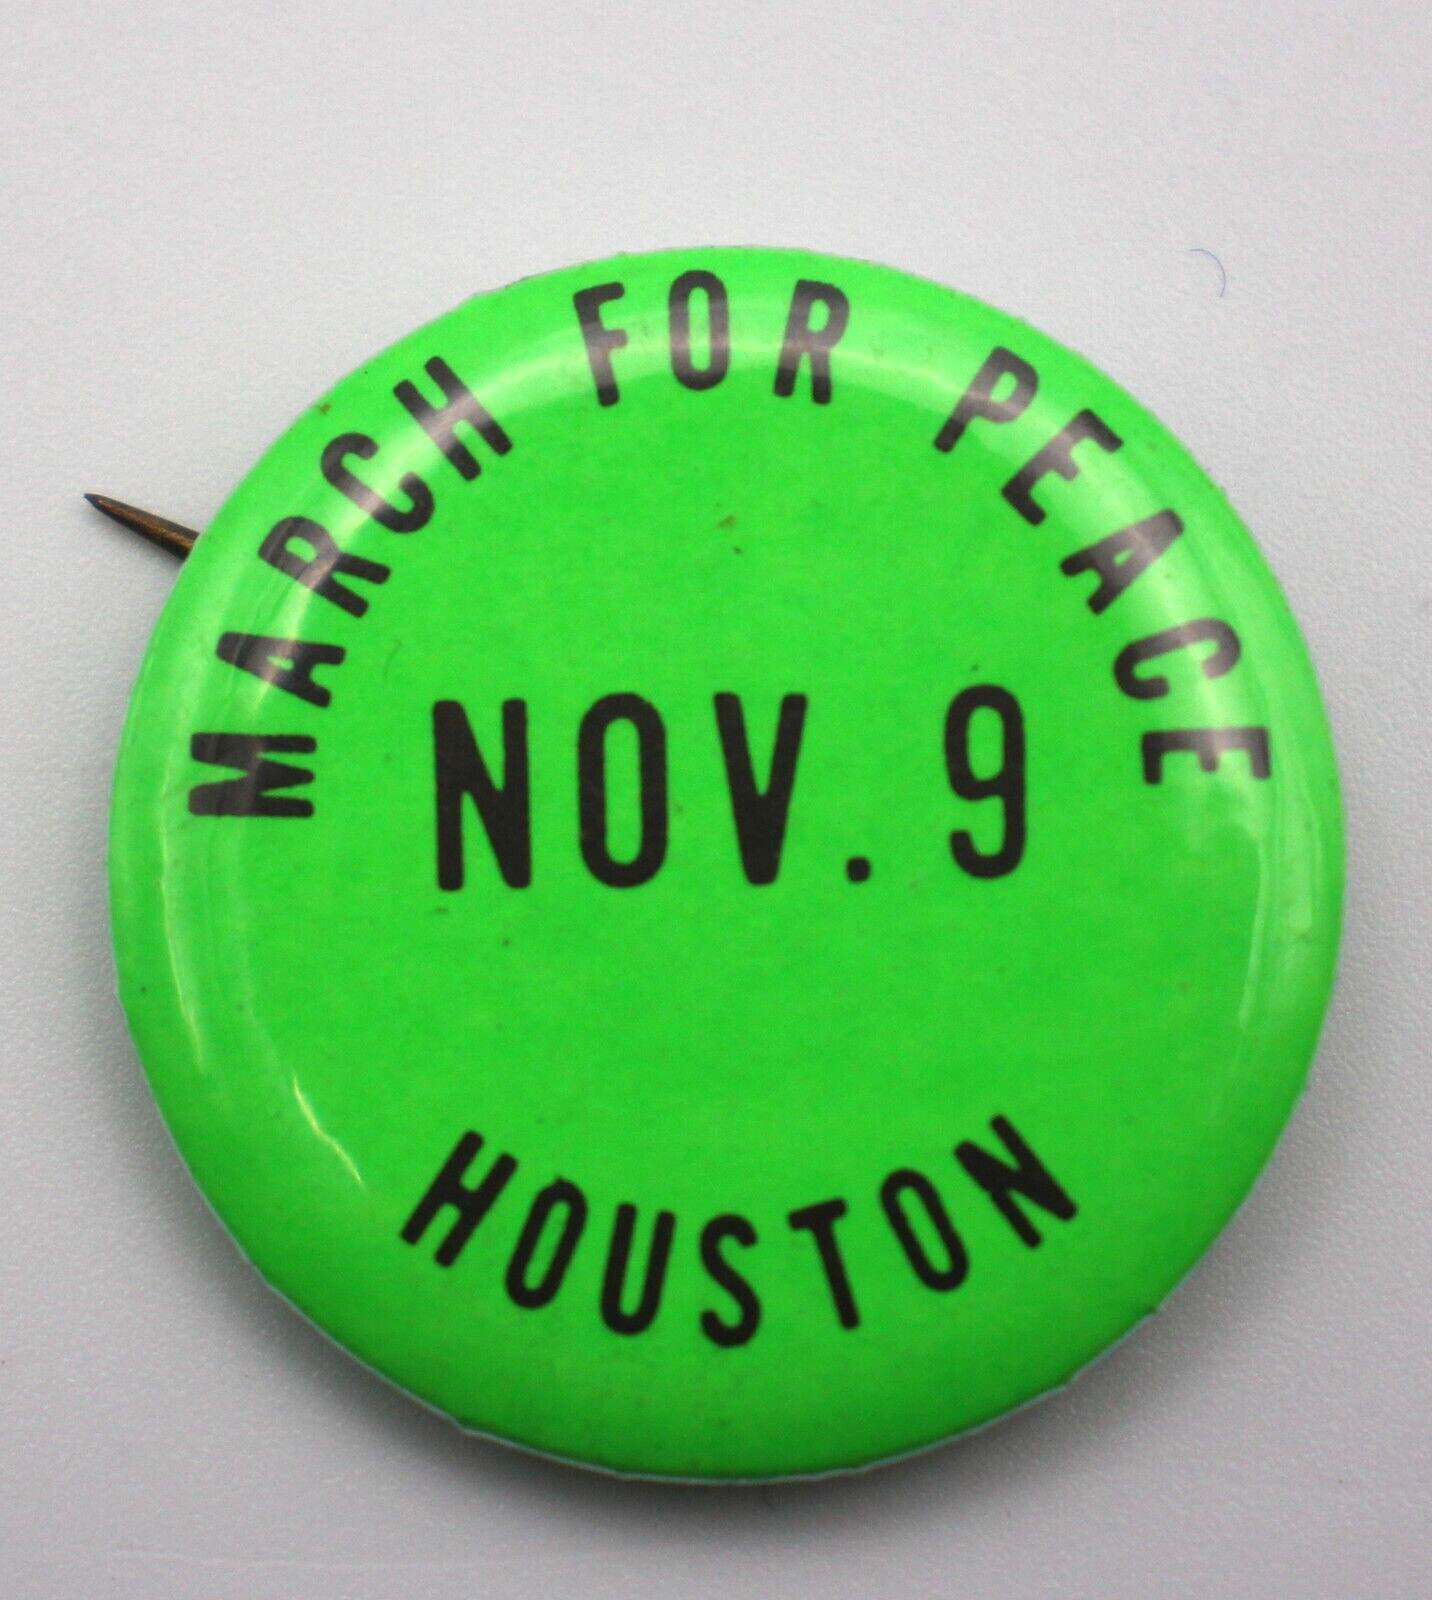 March For Peace Houston Texas Nov. 9 Vietnam War 60s Pin Pinback Cause Button